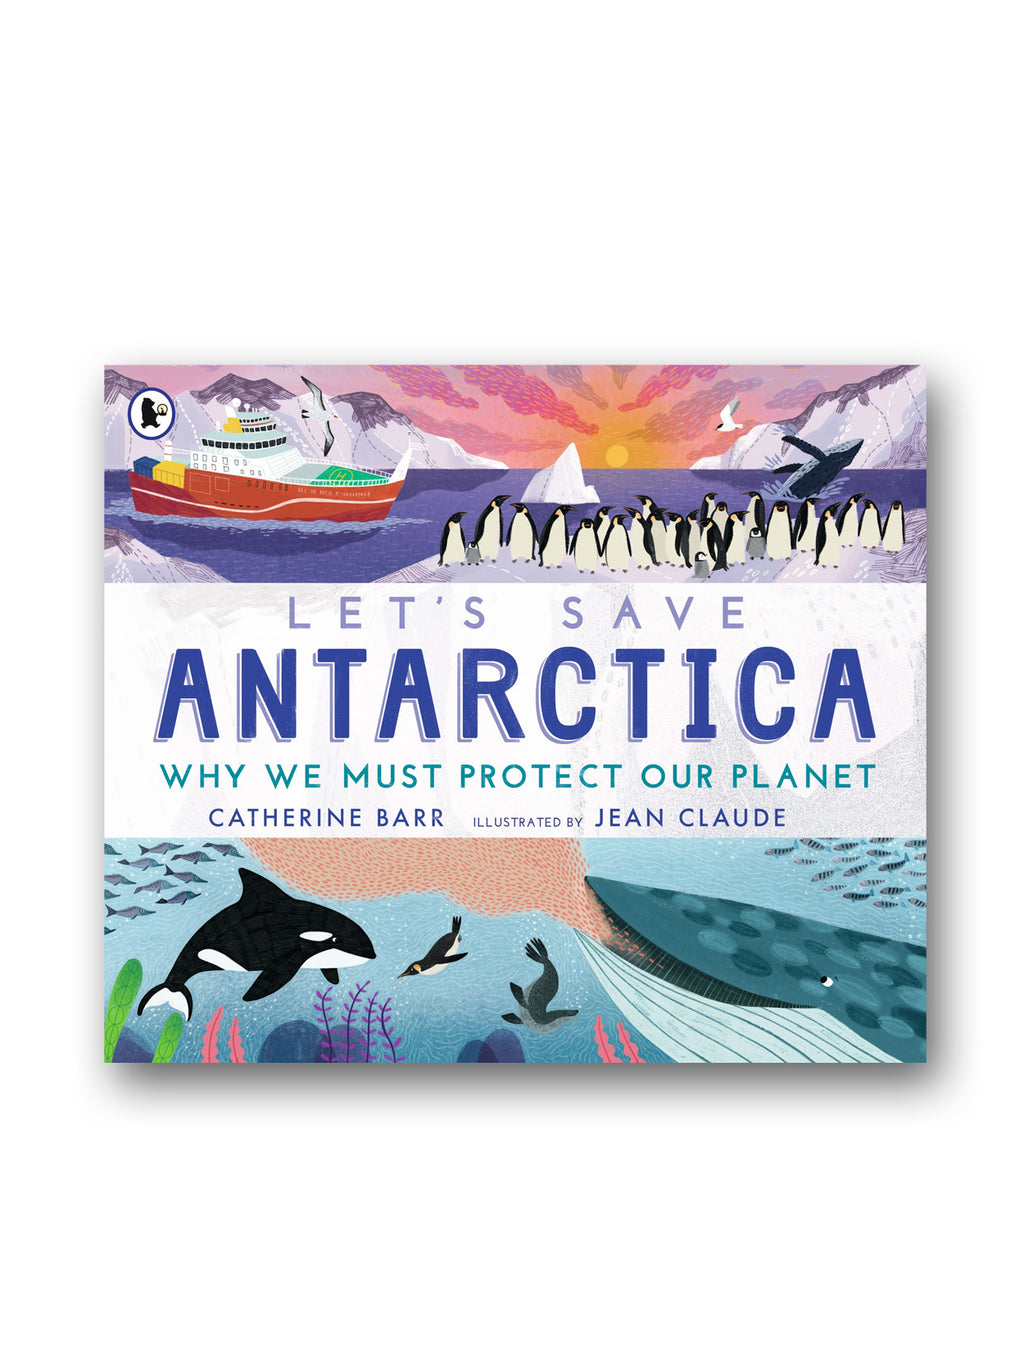 Let's Save Antarctica: Why We Must Protect Our Planet